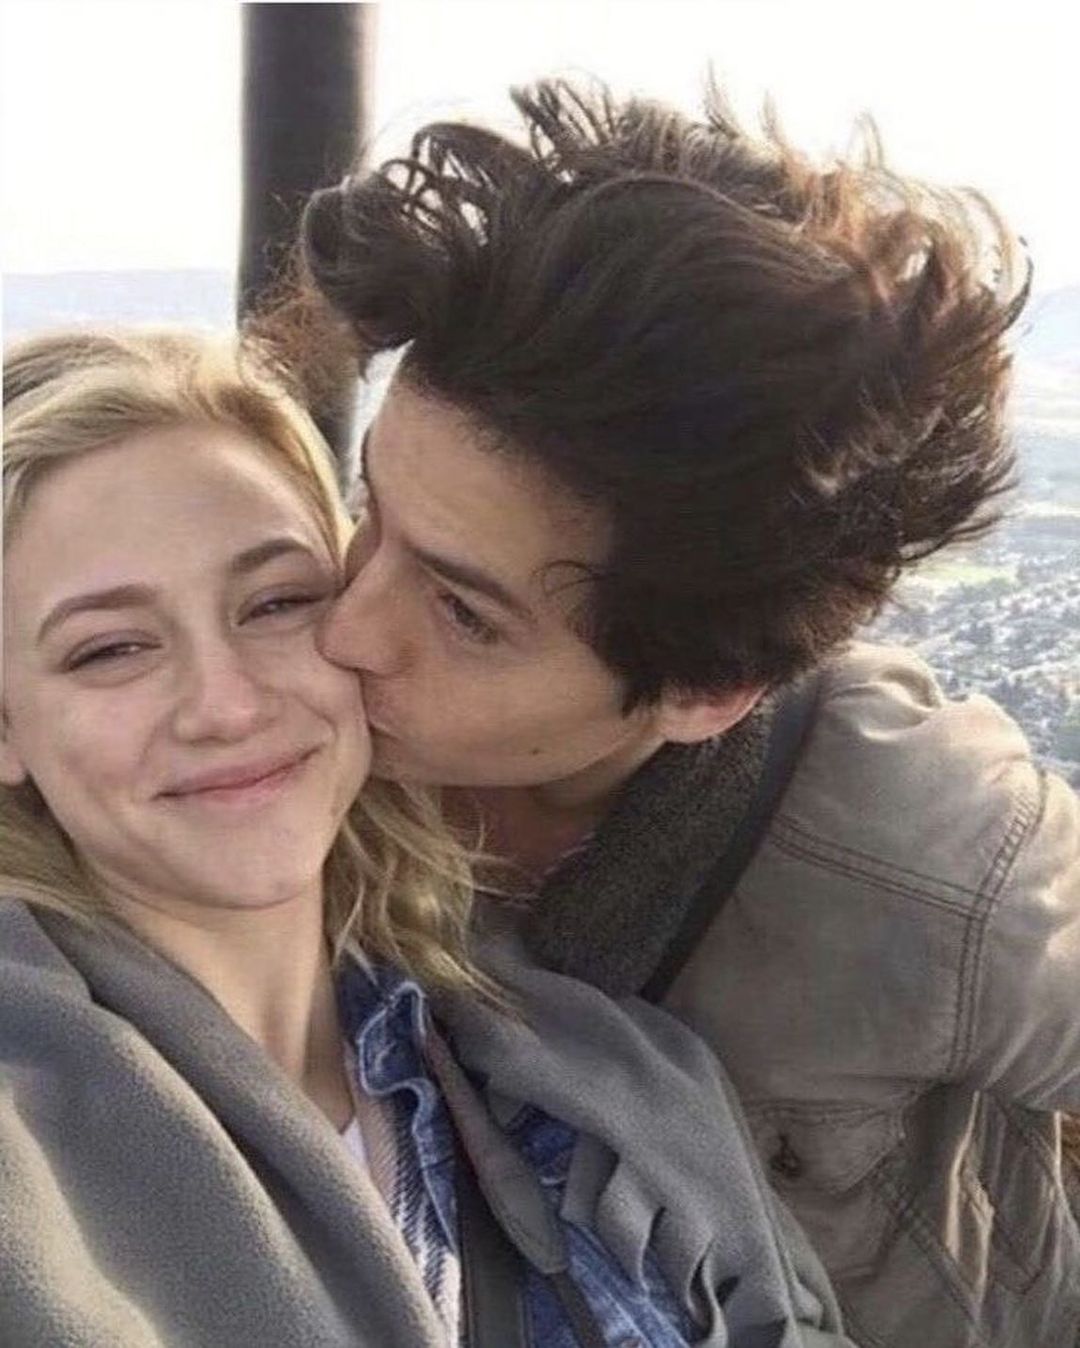 lili-reinhart-and-cole-sprouse-back-together-three-shiites-killed-in-kaduna-uk-parliament-suspended-style-rave